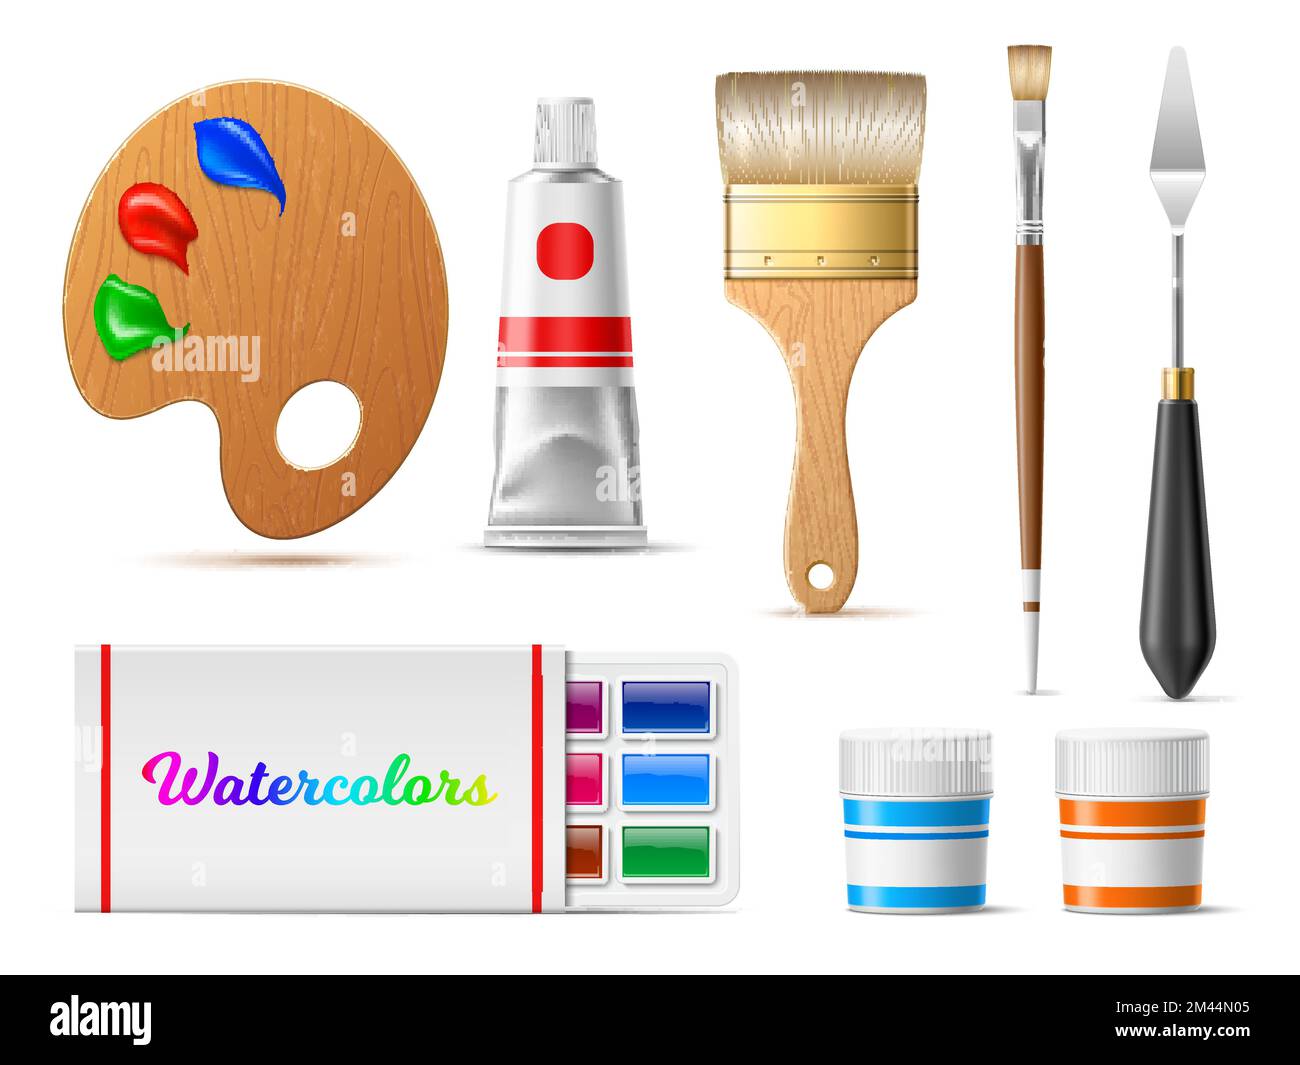 1,323 Used Brushes Jar Images, Stock Photos, 3D objects, & Vectors